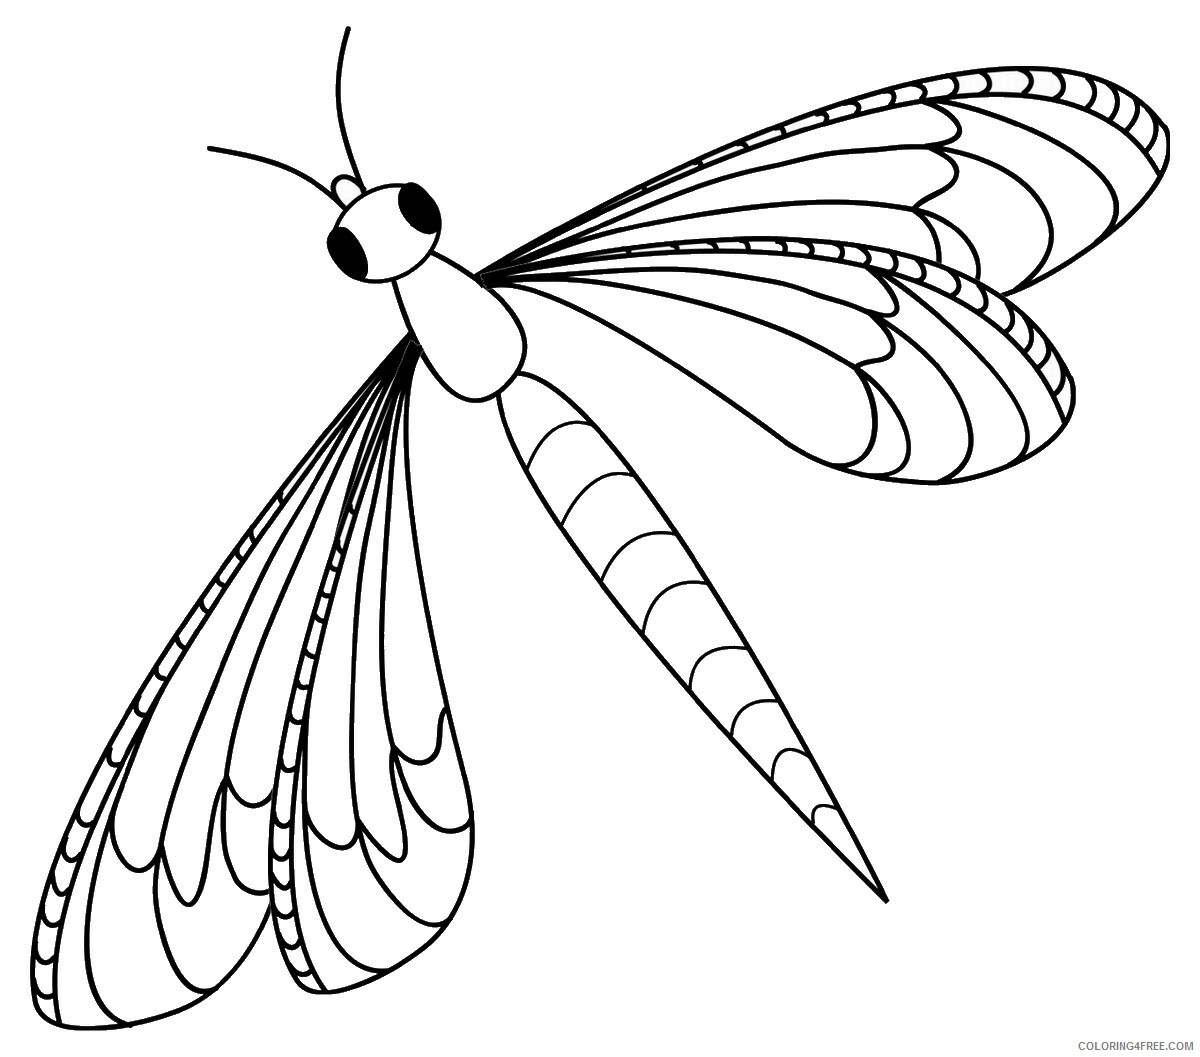 Insect Coloring Pages Animal Printable Sheets insects_cl_15 2021 2895 Coloring4free